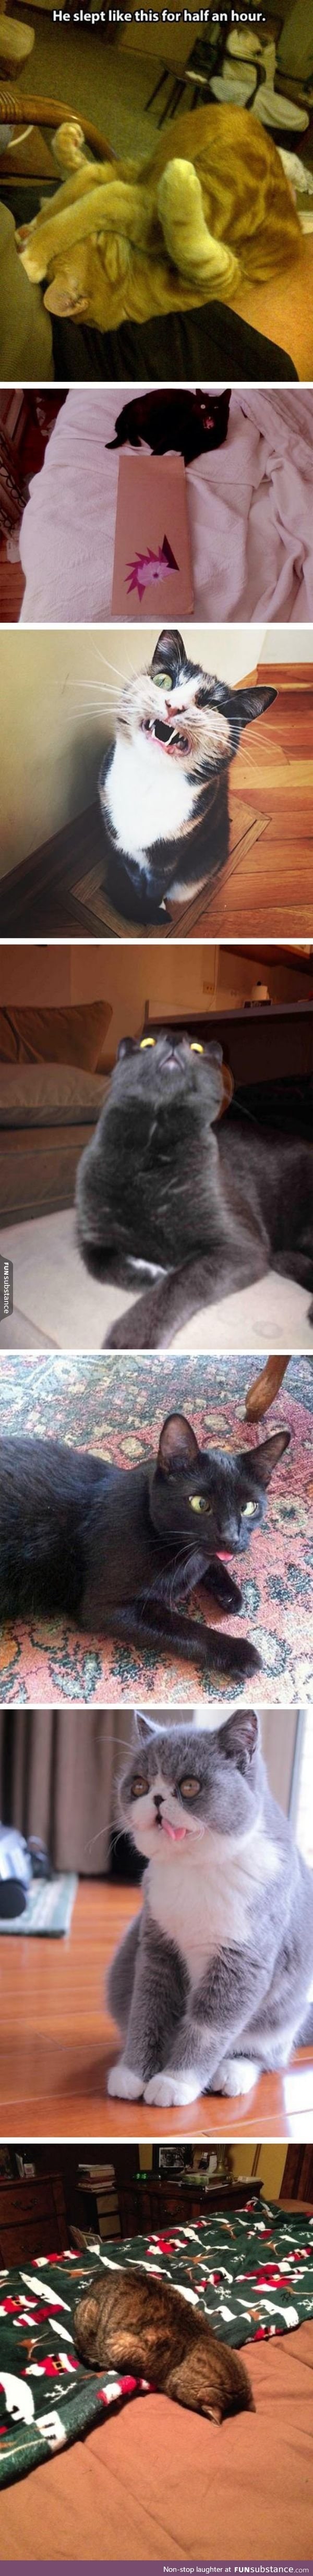 These cat pics made my day